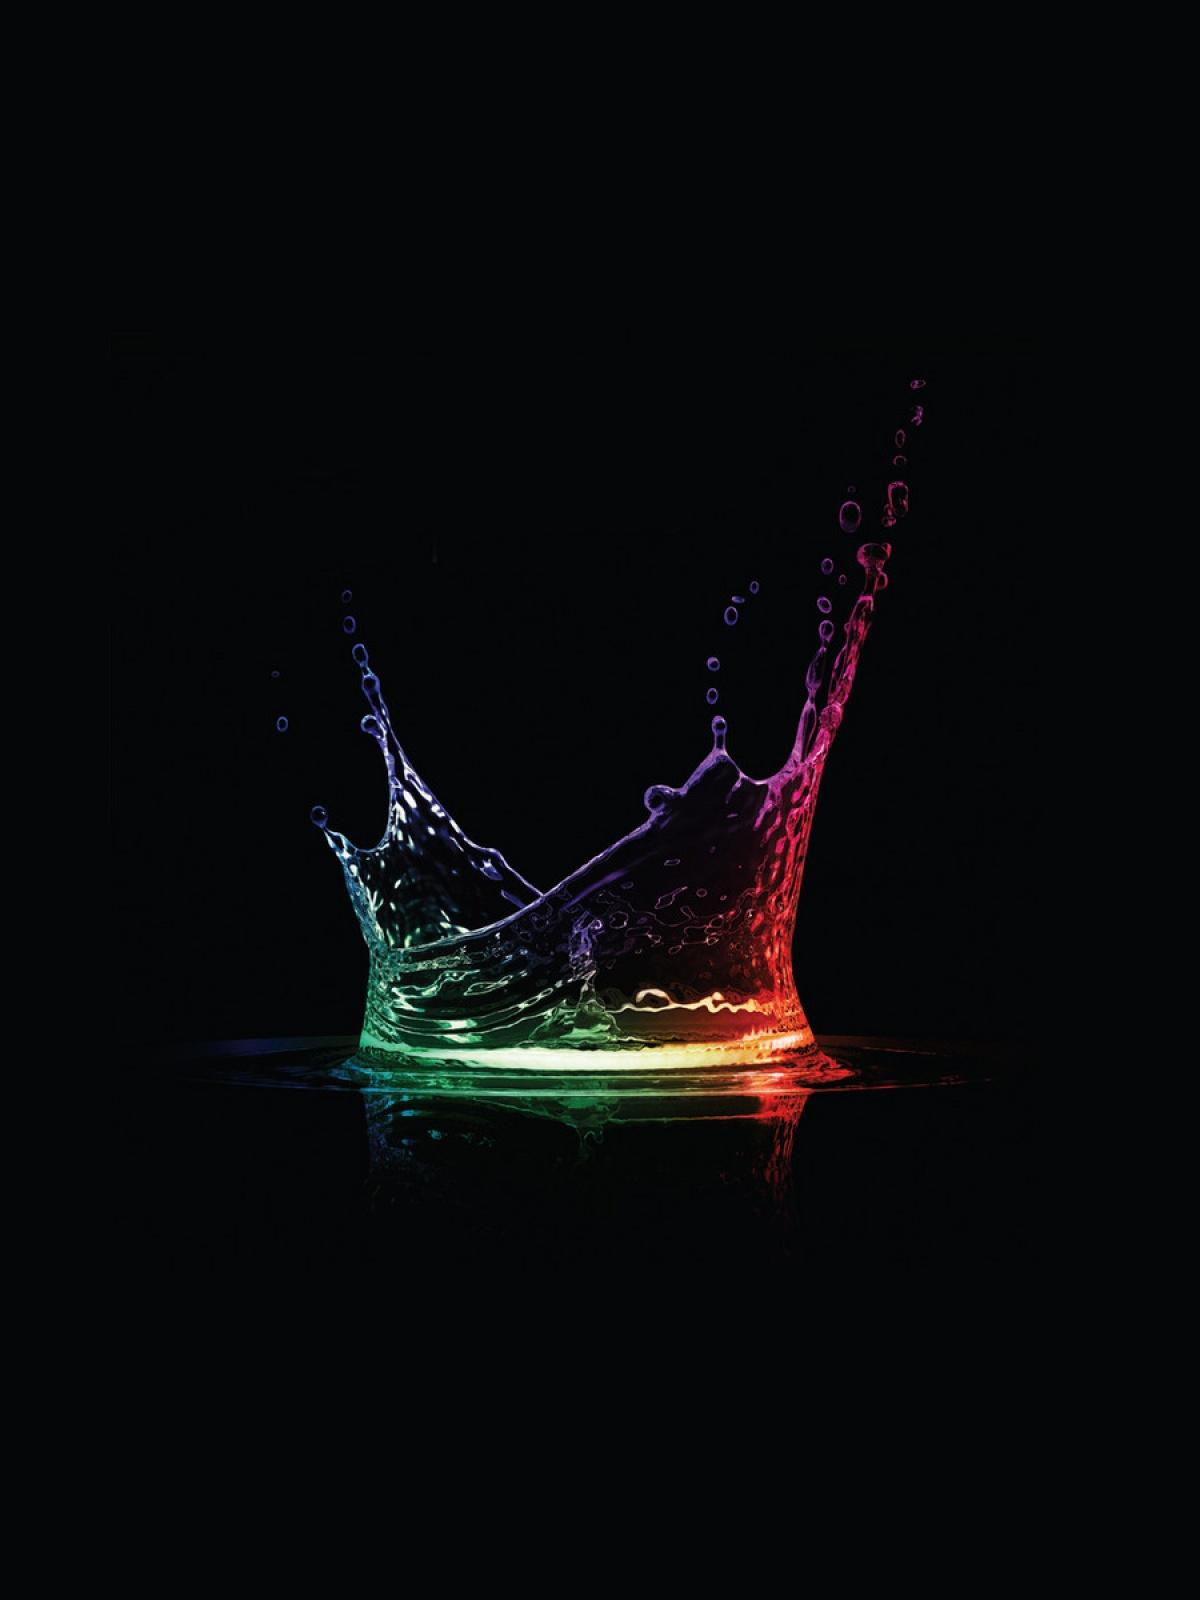 Android Image Wallpaper 3D Rainbow Water Drop Black. The Best